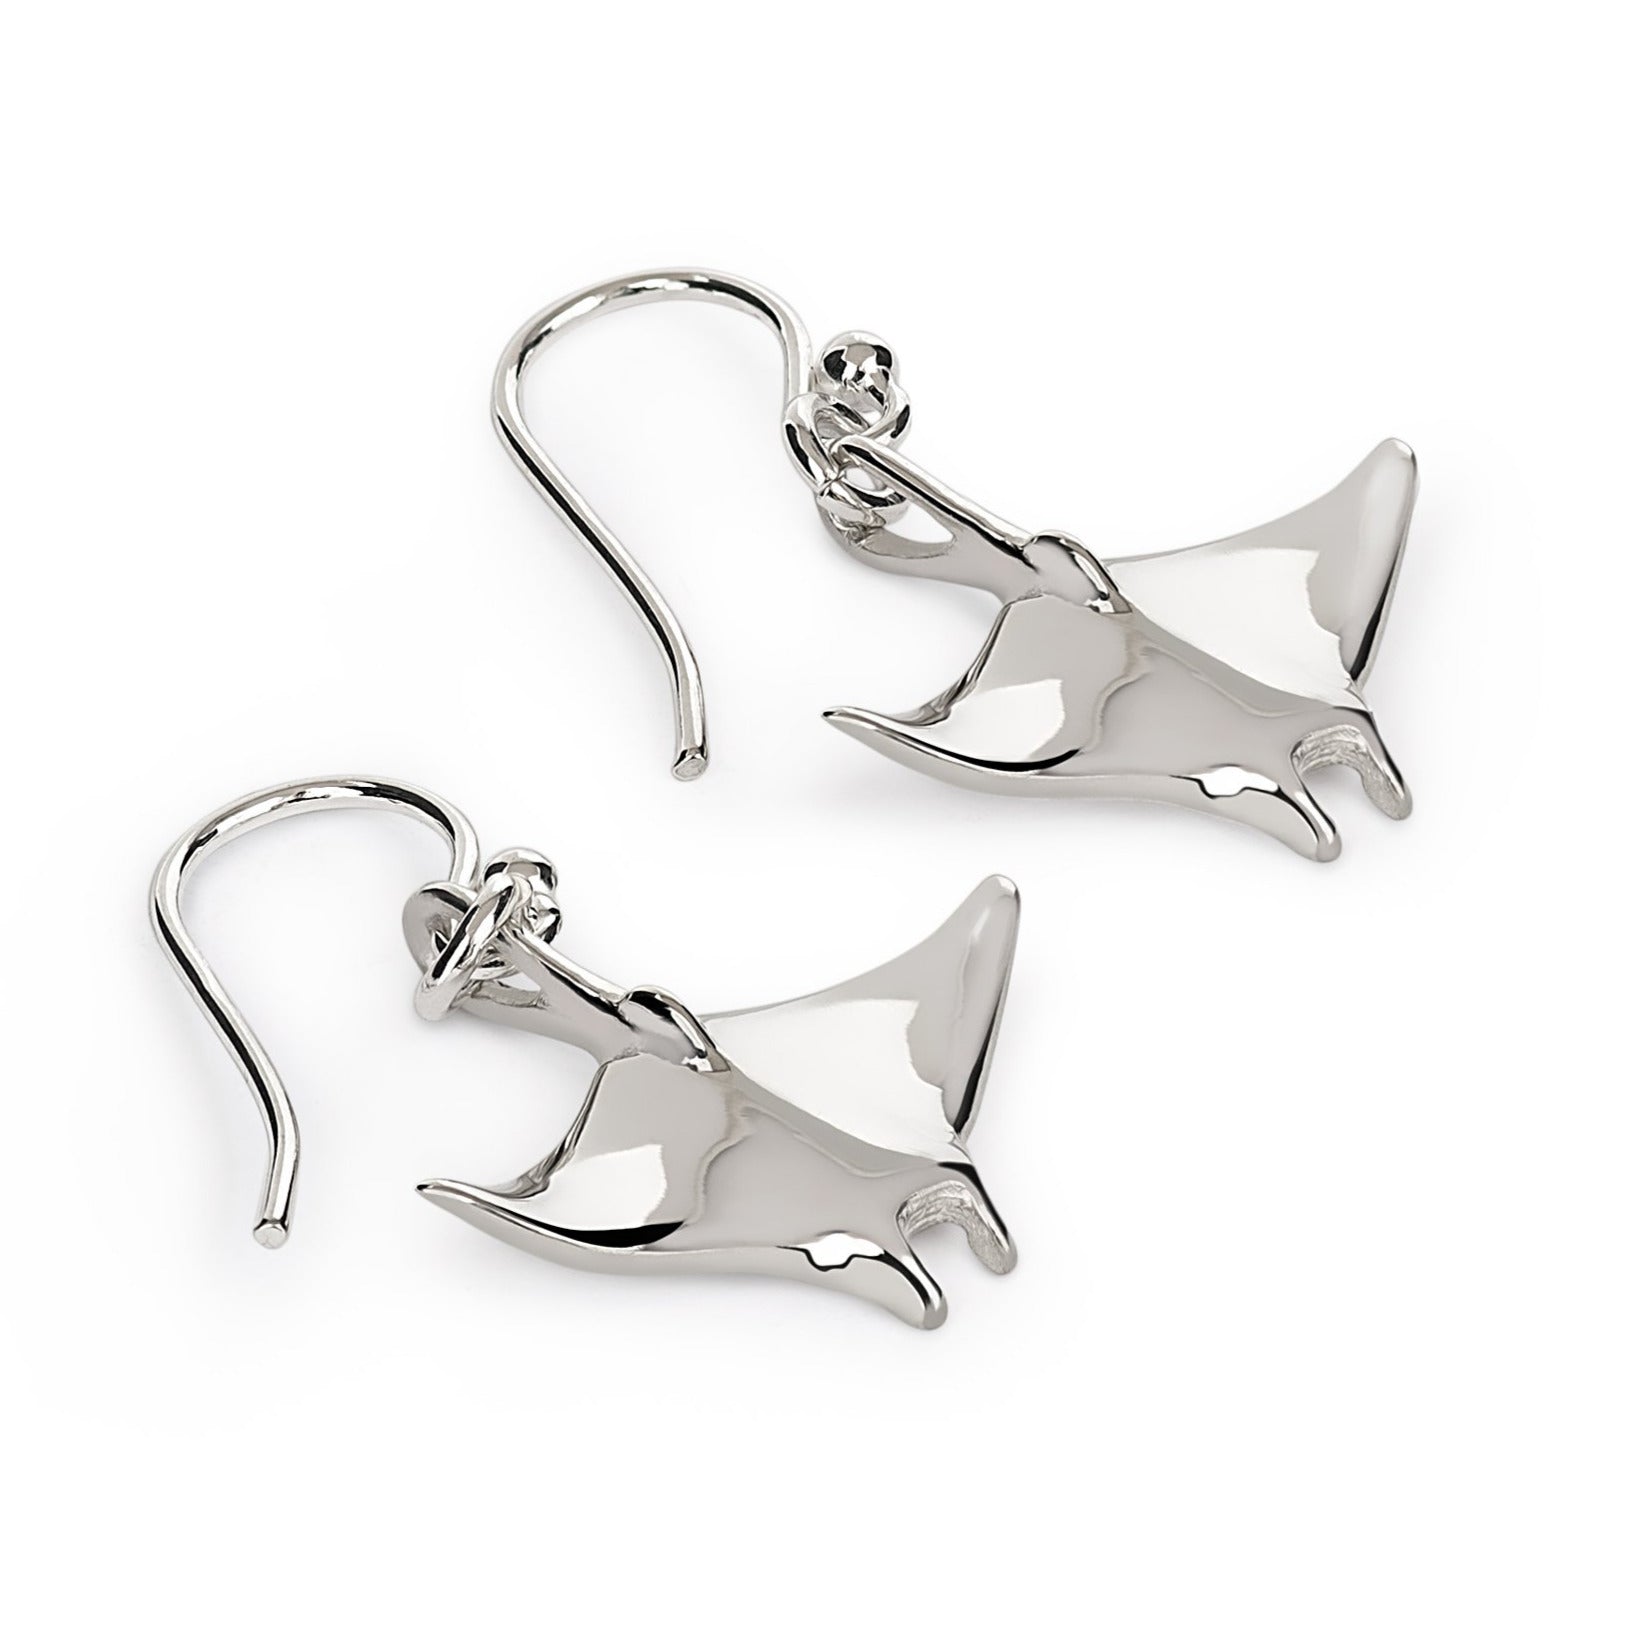 Stingray Earrings Sterling Silver- Manta Ray Sterling Silver Drop Earrings, Manta Ray Earrings, Stingray Charm, Sea Life Sterling Silver Drop Earrings - The Tool Store